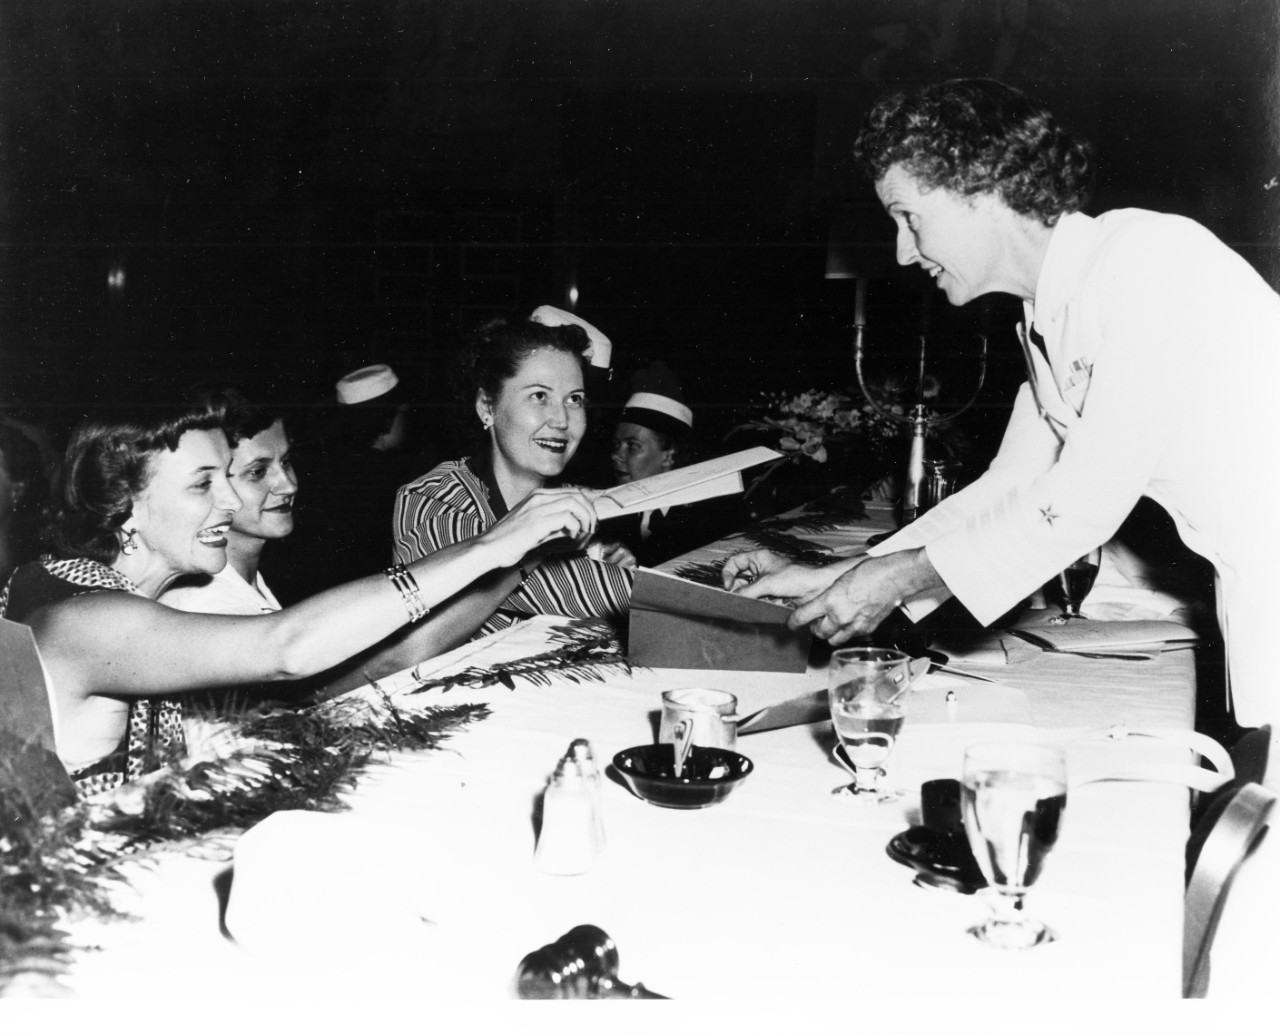 80-G-708663:  Tenth Anniversary of the WAVES, July 1952.  Captain Joy Bright Hancock, Director of the WAVES, signs autographs at a 10th Anniversary reunion of WAVES held at Hotel Statler, Washington, D.C.   Photograph dated July 21, 1951, but probably taken on that date in 1952.   Official U.S. Navy photograph, now in the collections of the National Archives. 